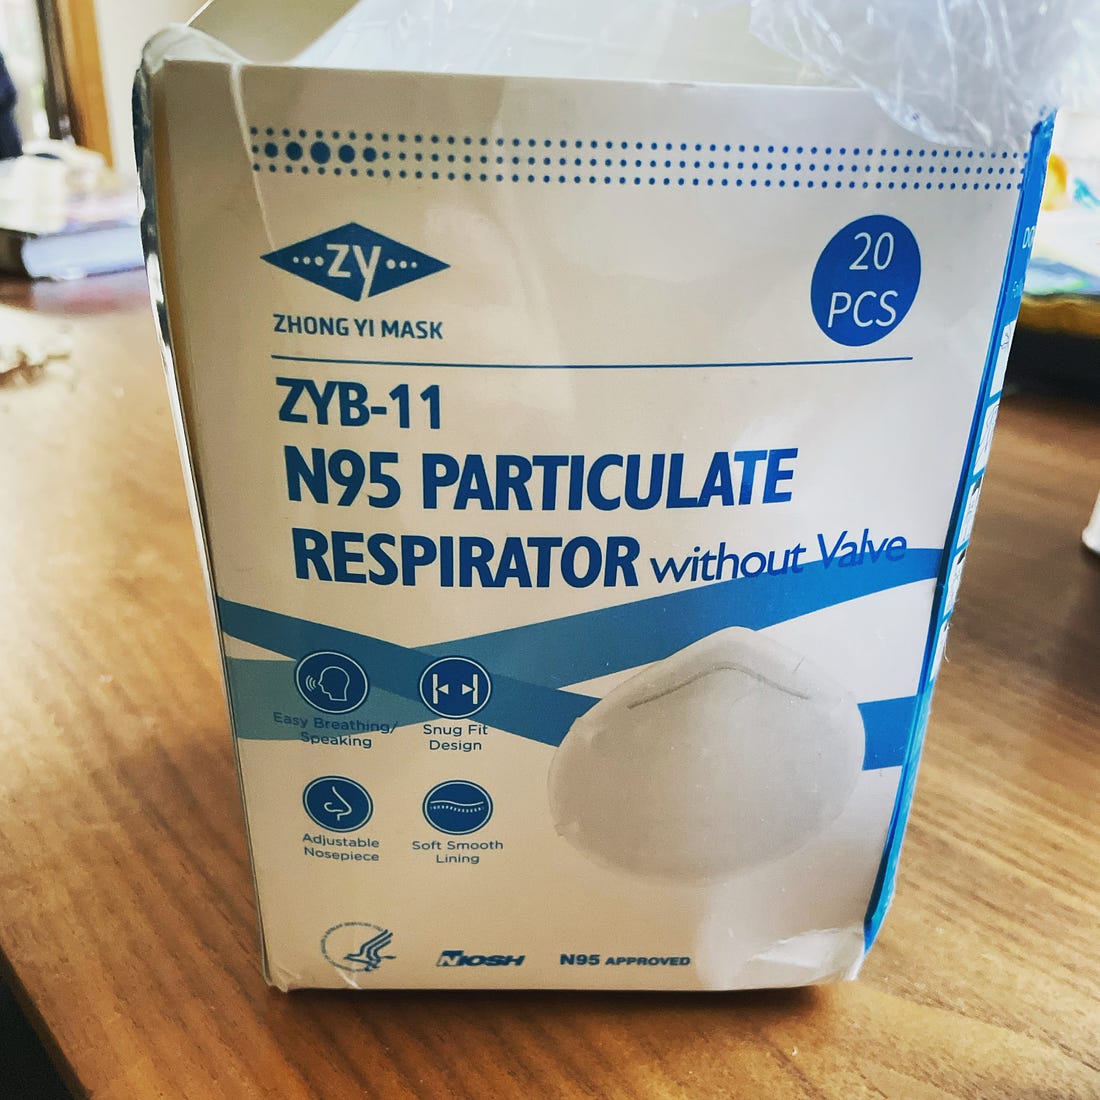 An open and slightly distressed box of N95 masks. The blue lettering on a white box reads, in part, “Zhong Yi Mask, ZYB-11, N95 Particulate Respirator without valve”